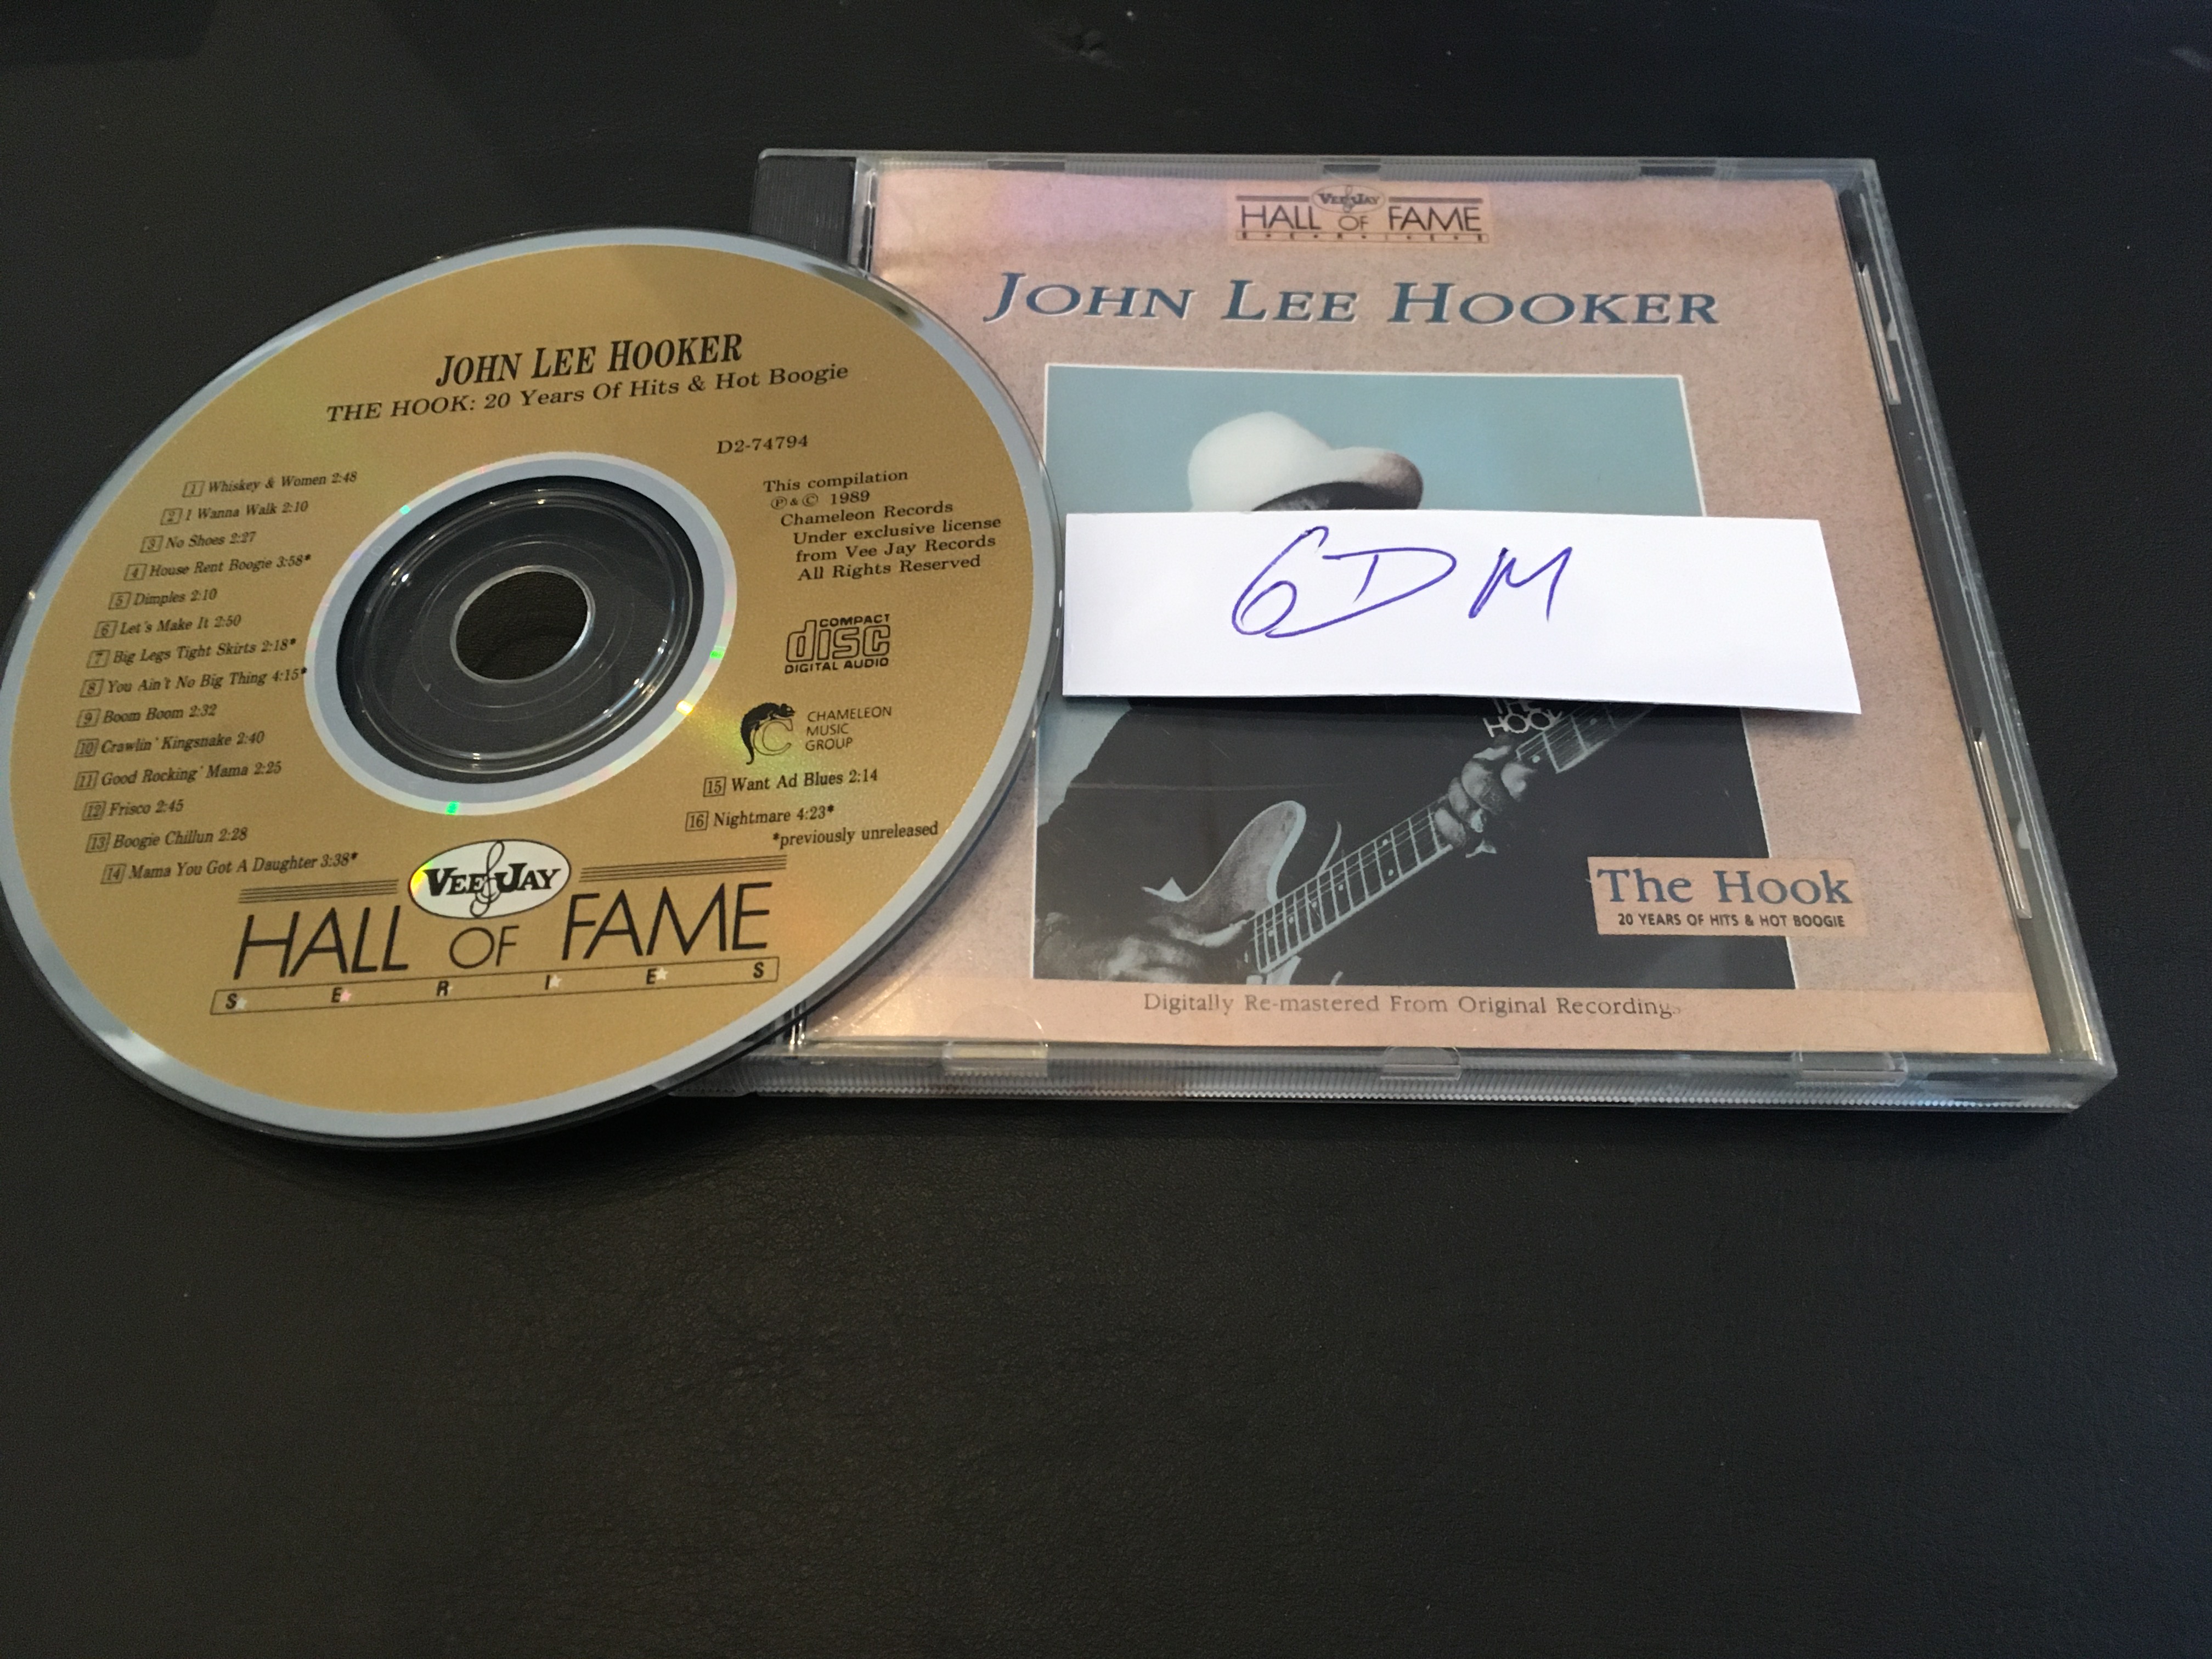 John Lee Hooker-The Hook 20 Years Of Hits and Hot Boogie-(D2-74794)-CD-FLAC-1989-6DM